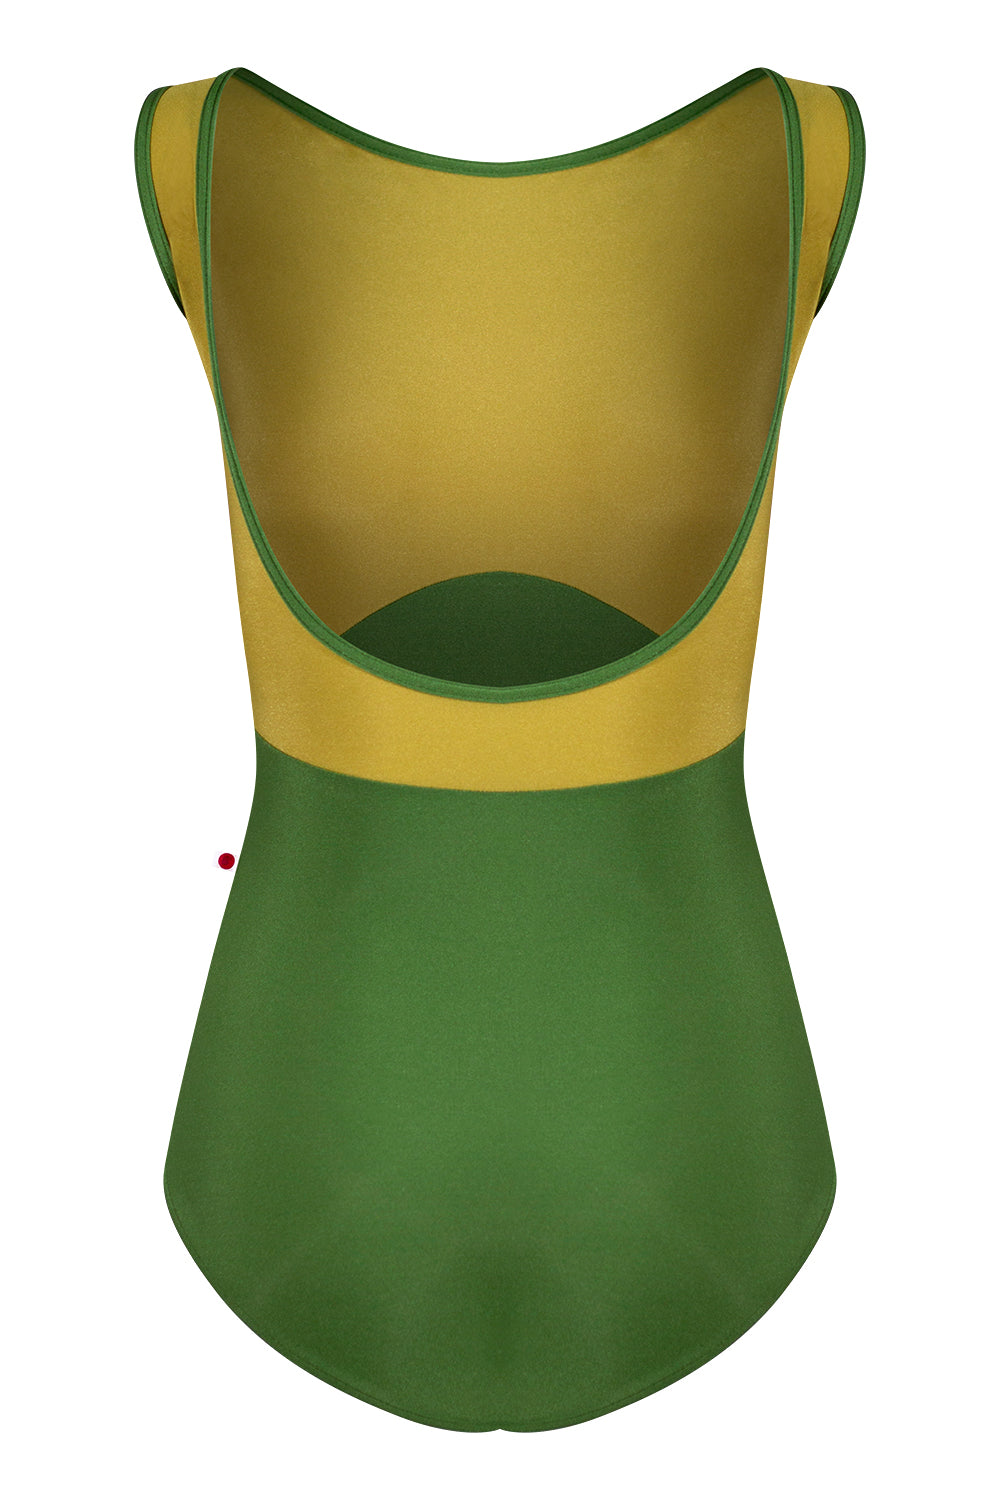 Sofiane Duo leotard in N-Lucky body color with N-Cricket top color and N-Lucky trim color